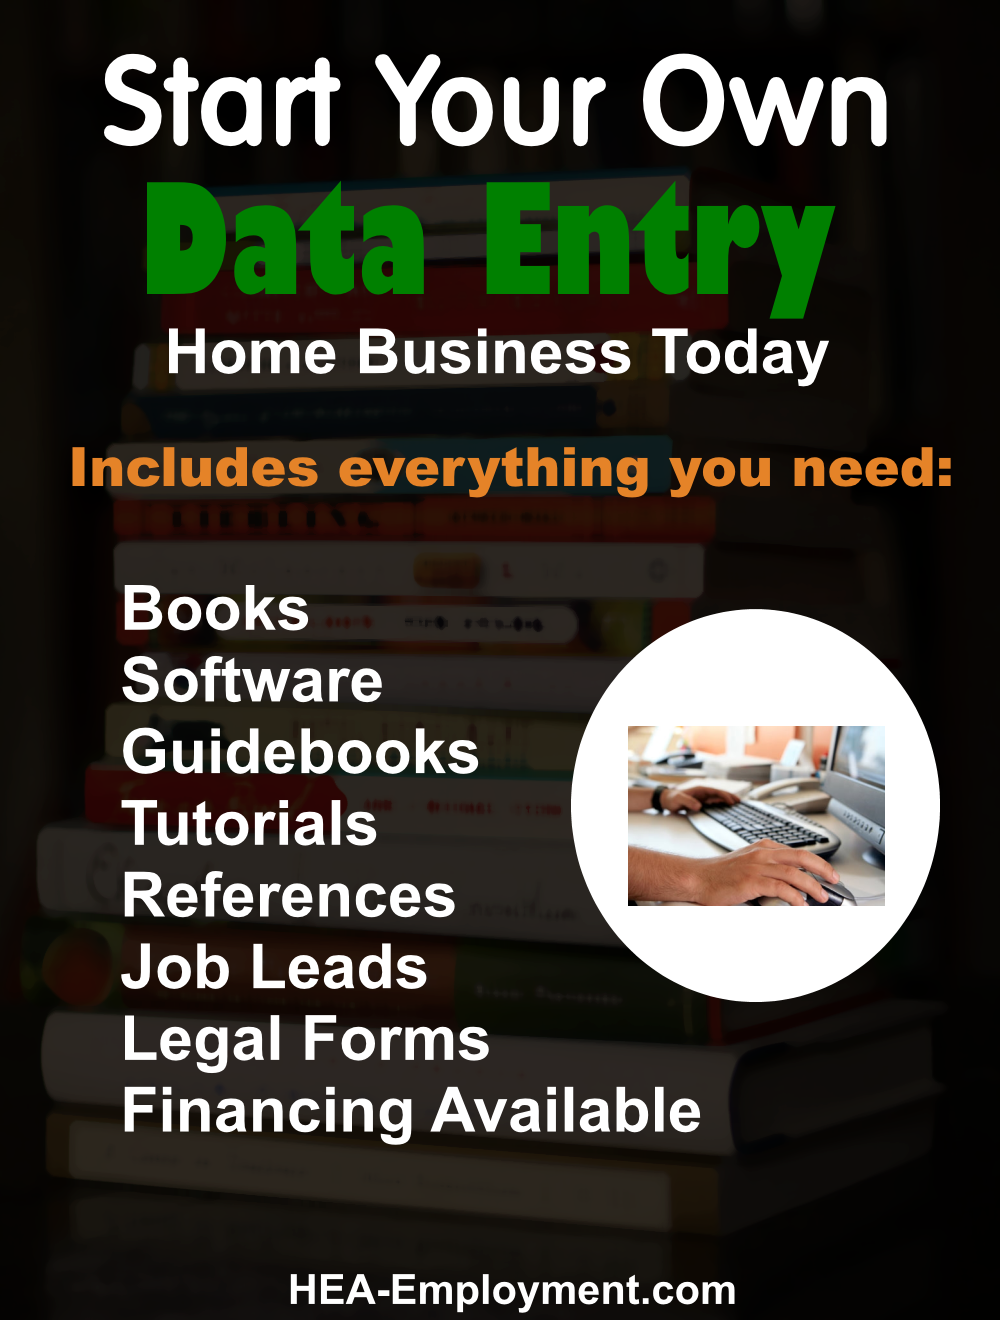 Start your own data entry legitimate home based business. Fully equipped home business package with everything you need to get started. Productivity software, tutorials, guidebooks, references, manuals, tax advice and legal forms are included with each kit. Be your own boss!